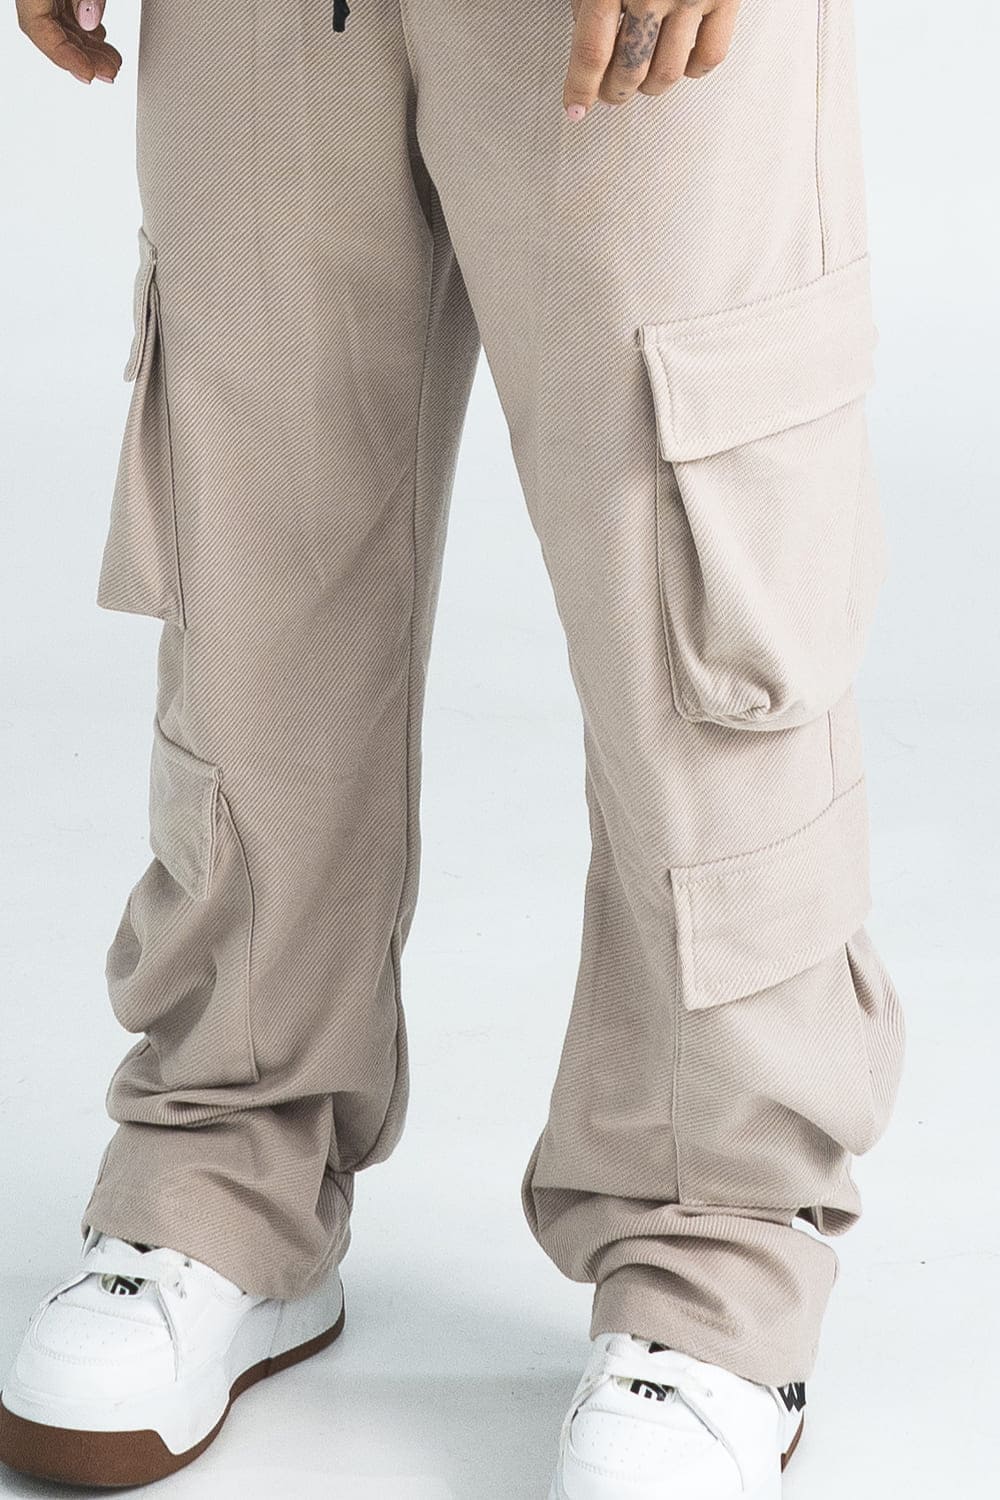 BCO 2.0 Textured Cargo Pants - SAND 8335